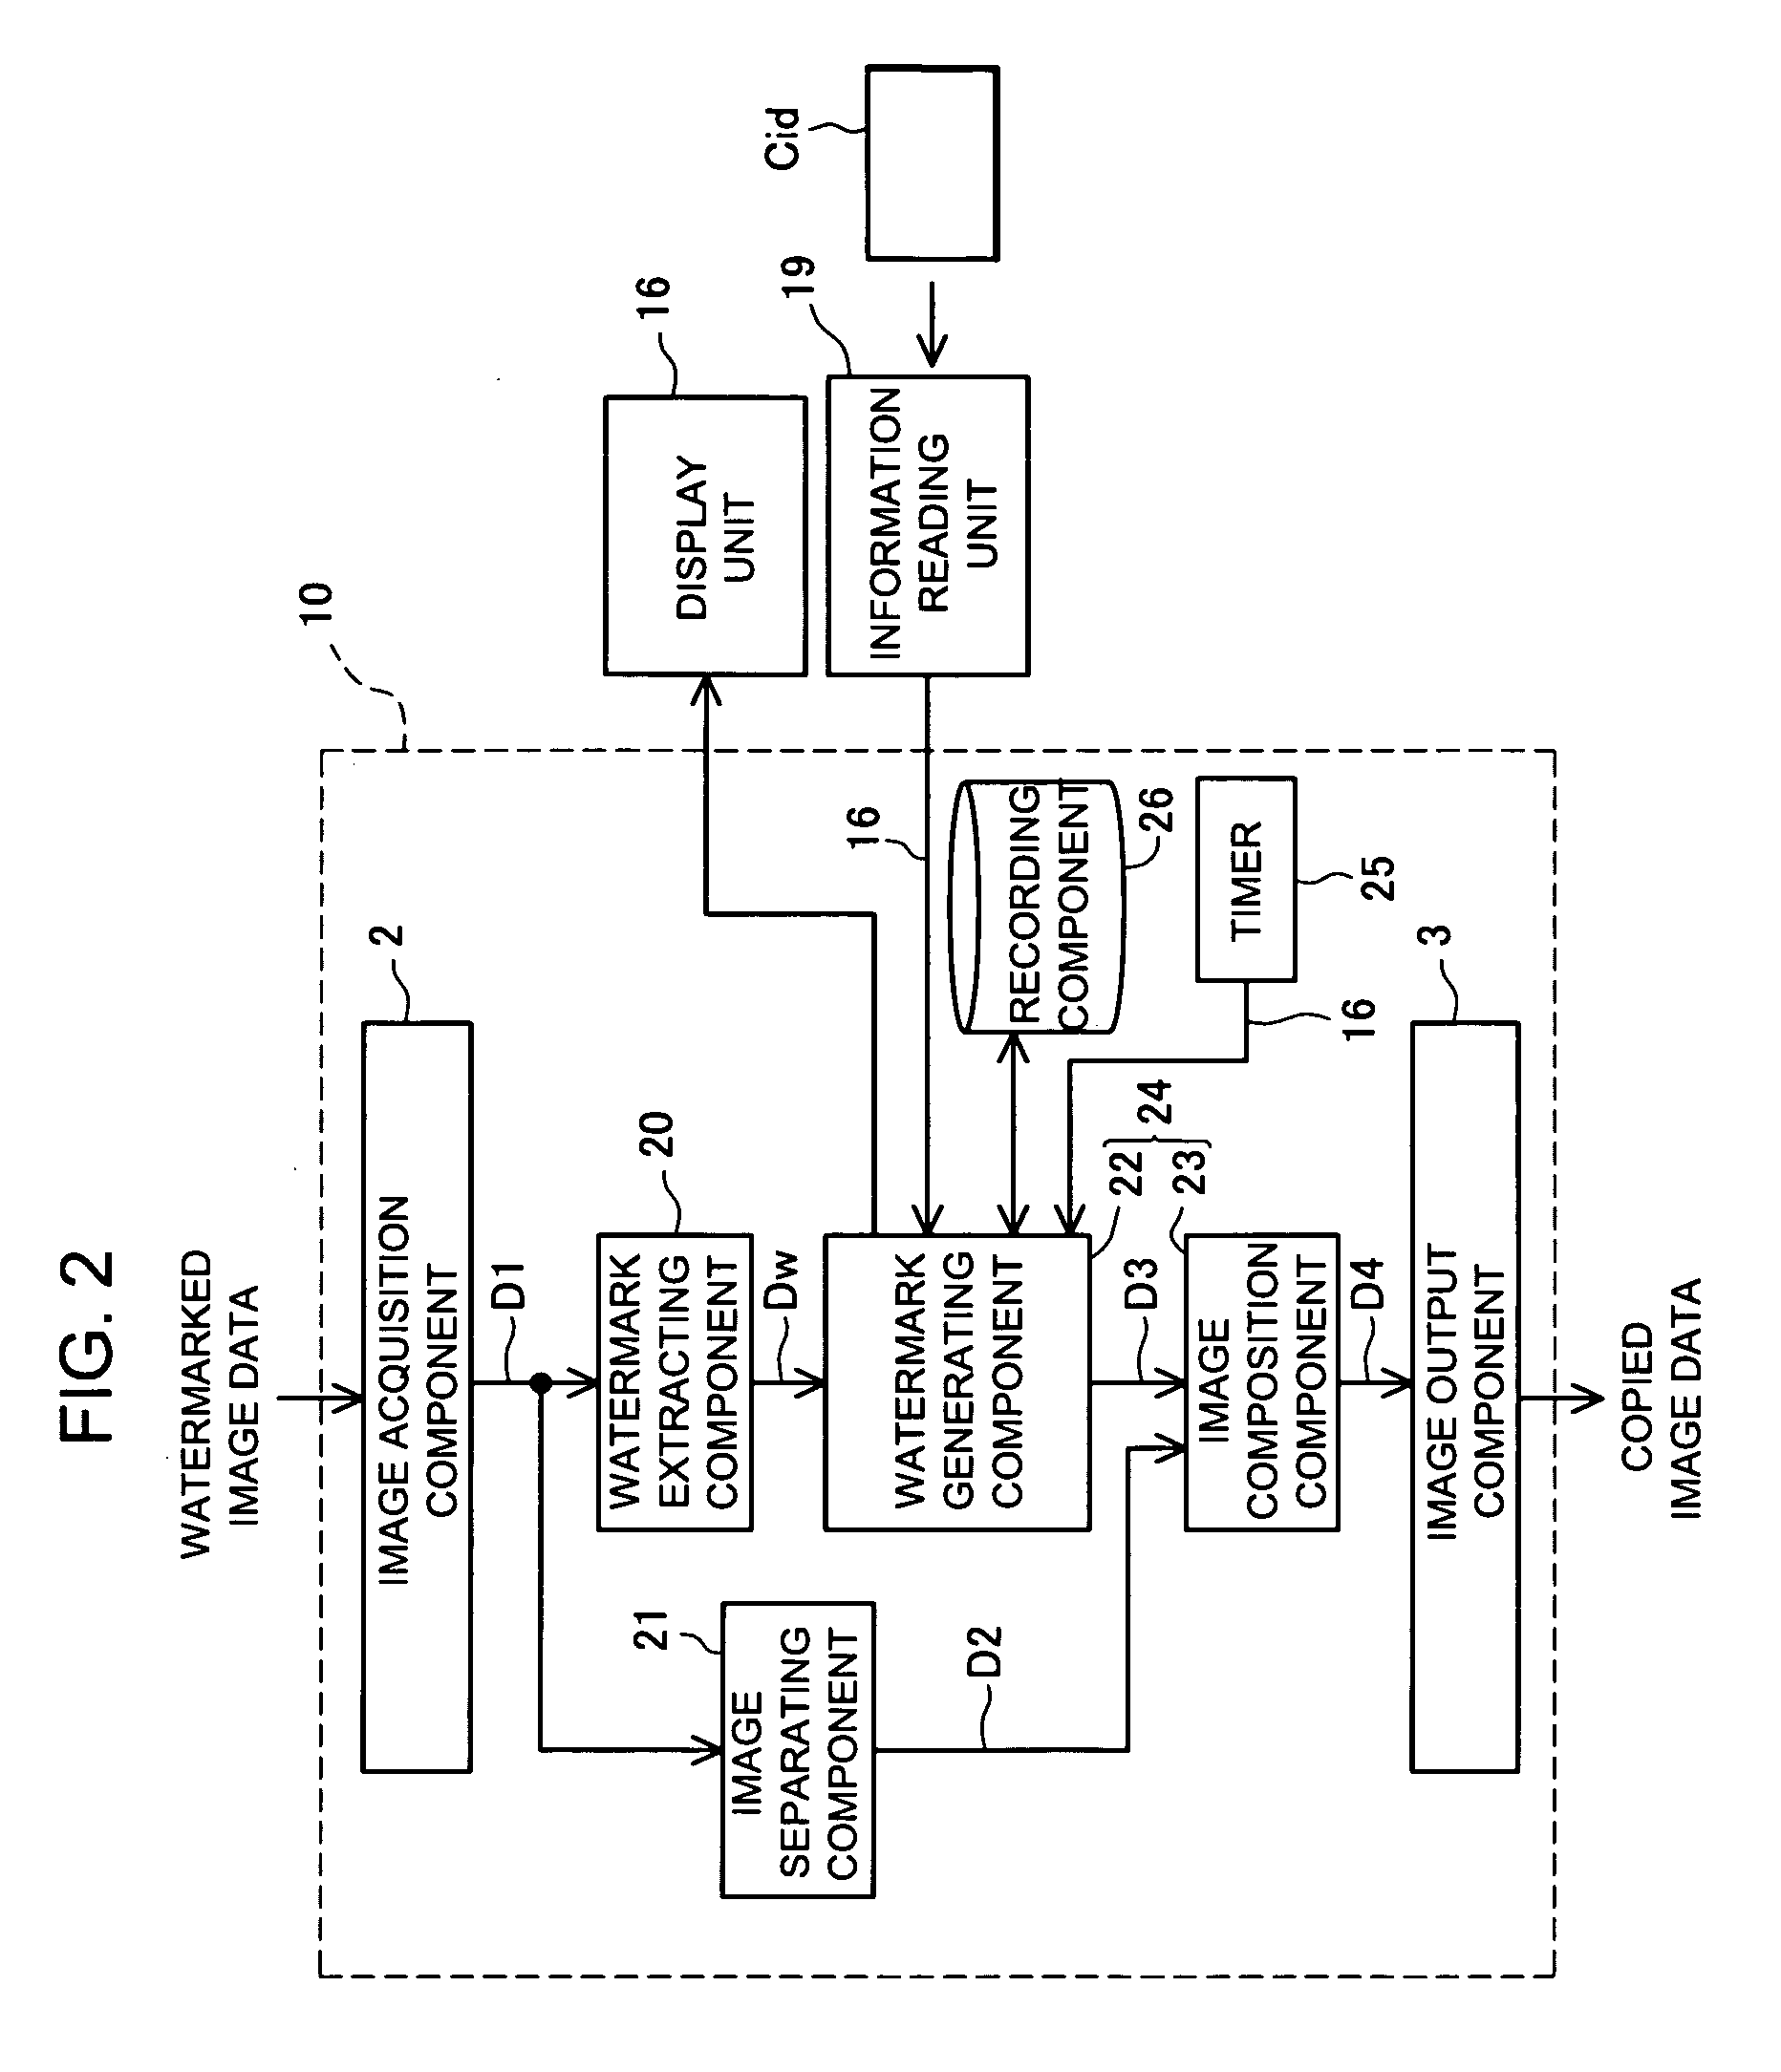 Additional Information Processing Apparatus, Additional Information Processing System, and Additional Information Processing Method